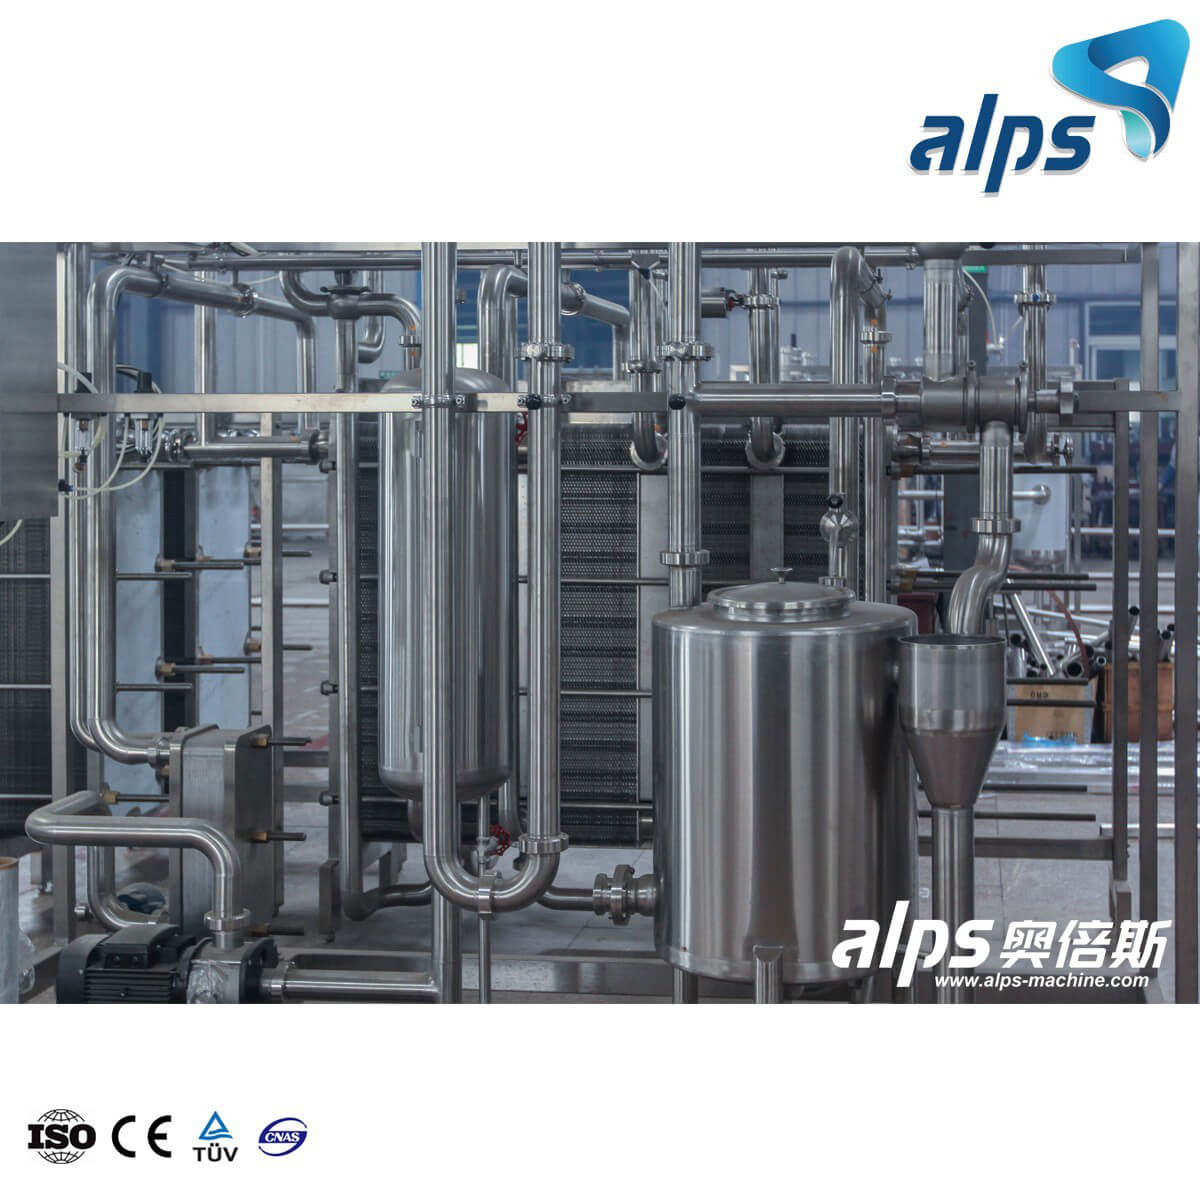 Plate Type Pasteurizing Sterilizer Equipment For Juice And Tea Drinks